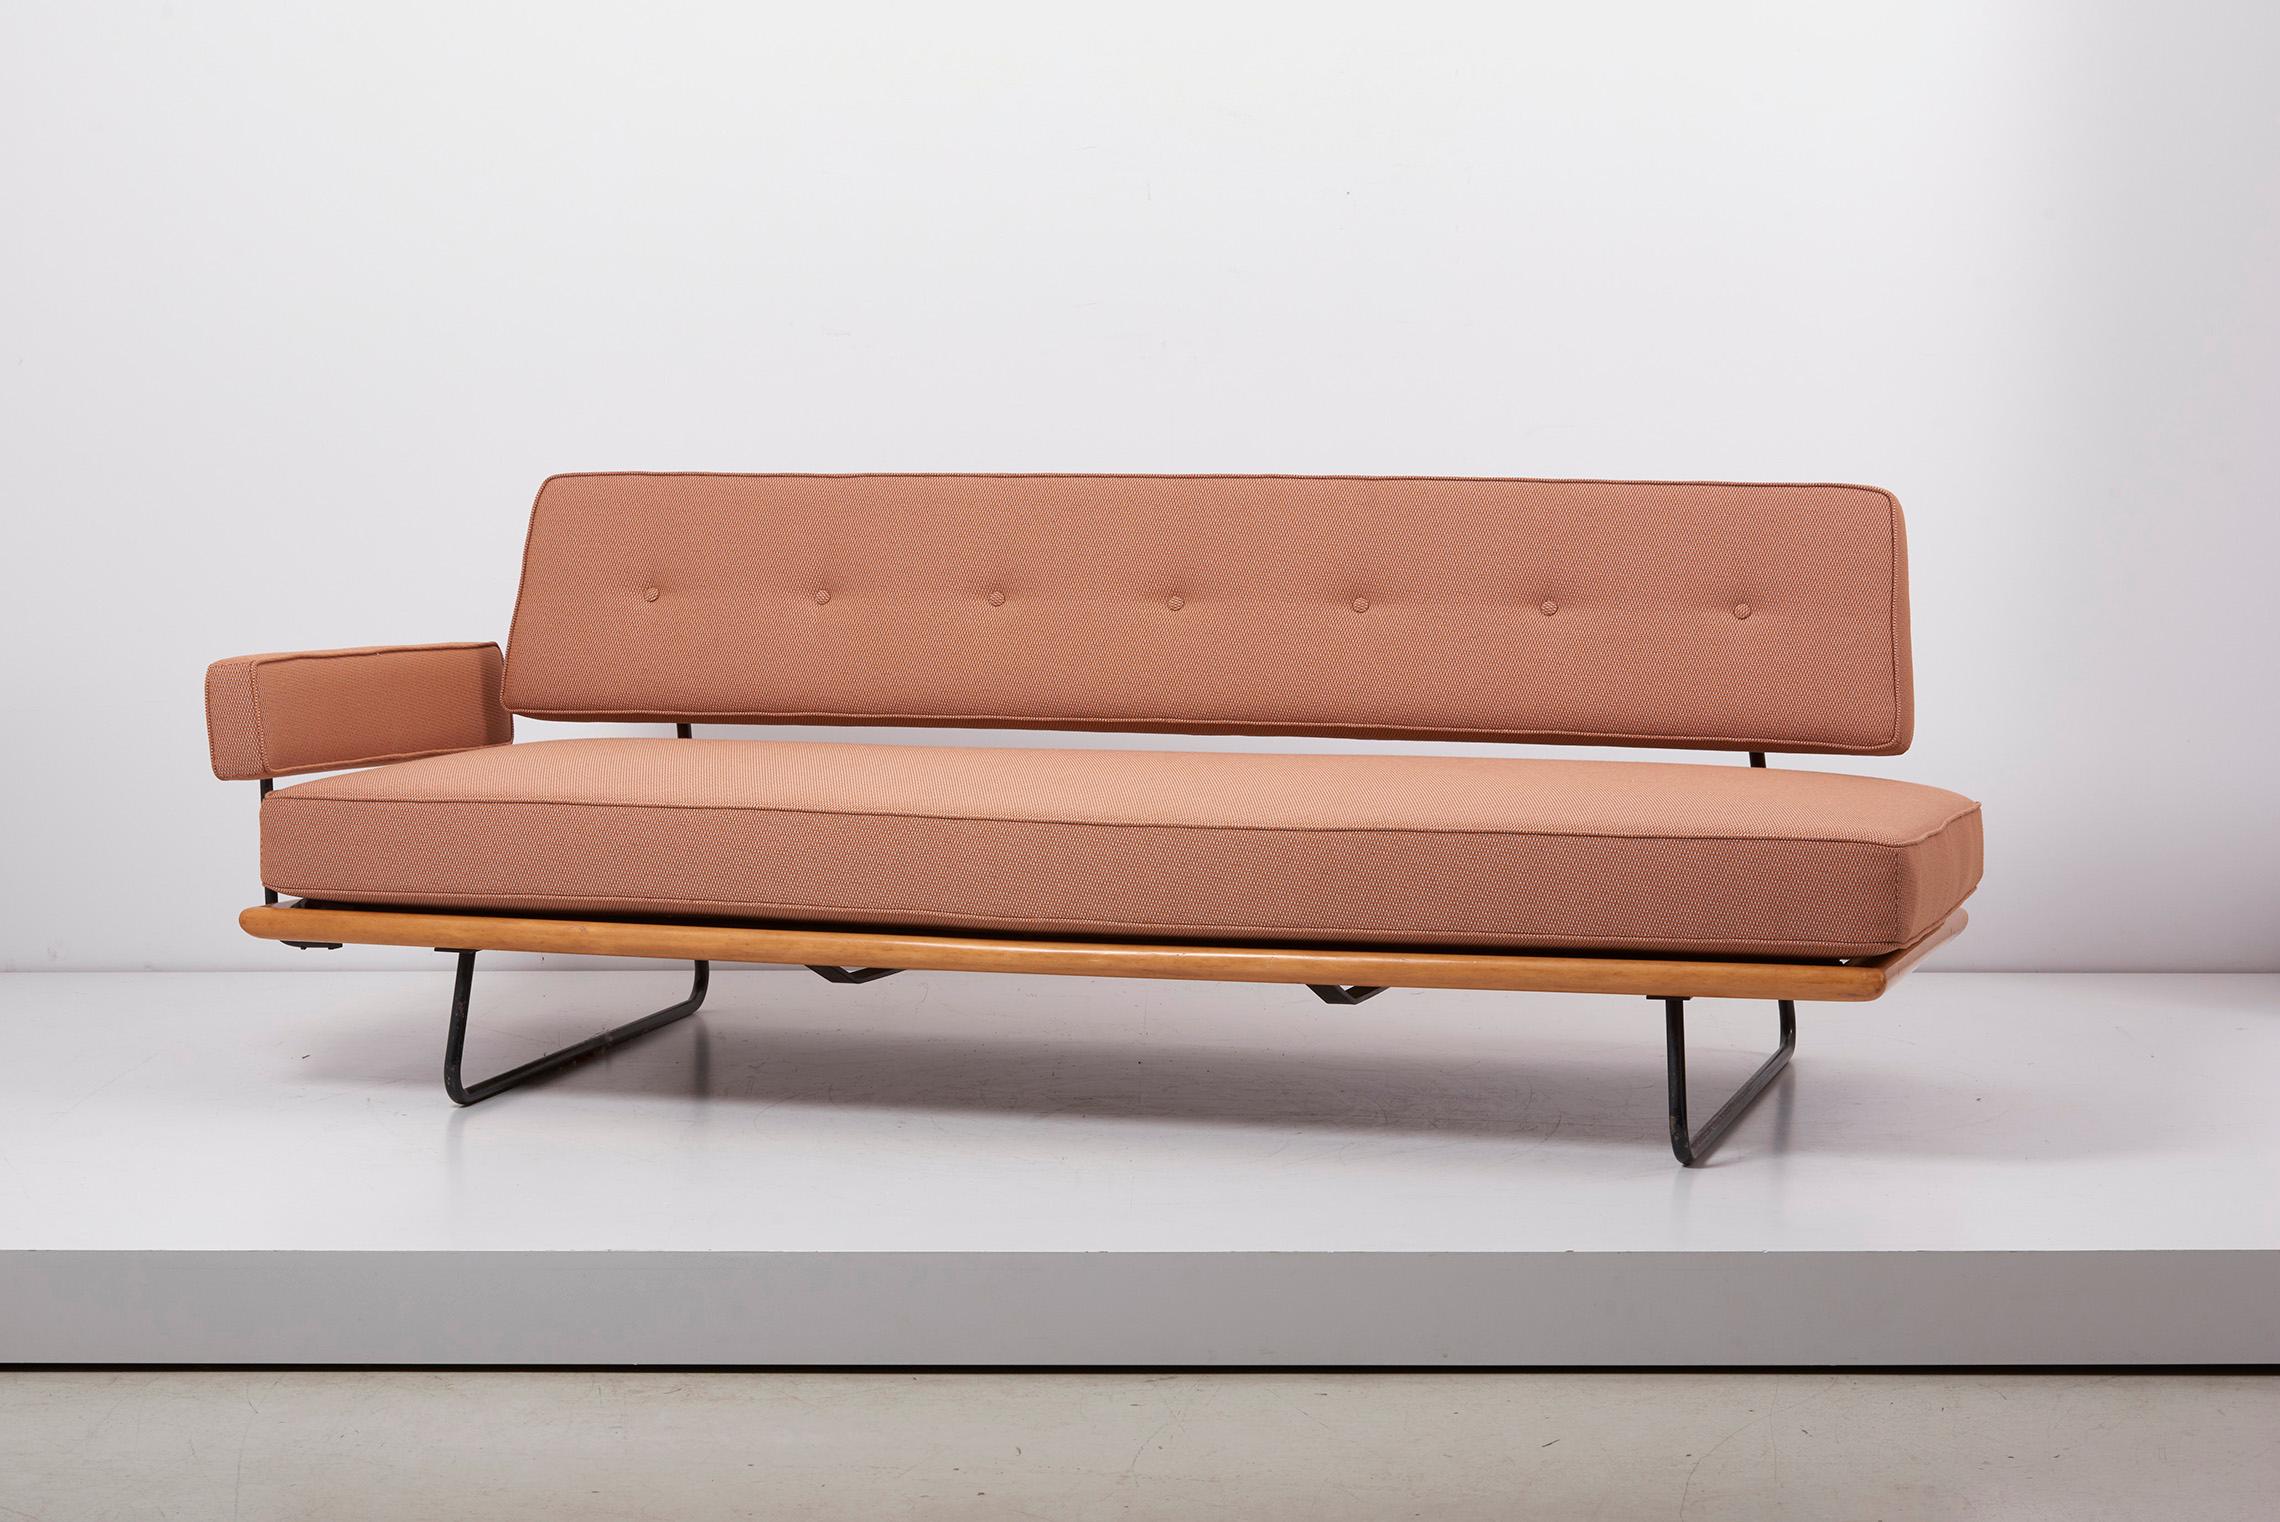 German 1950s Minimalist Daybed Rolf Grunow for Knoll, Beechwood & Metal, New Upholstery